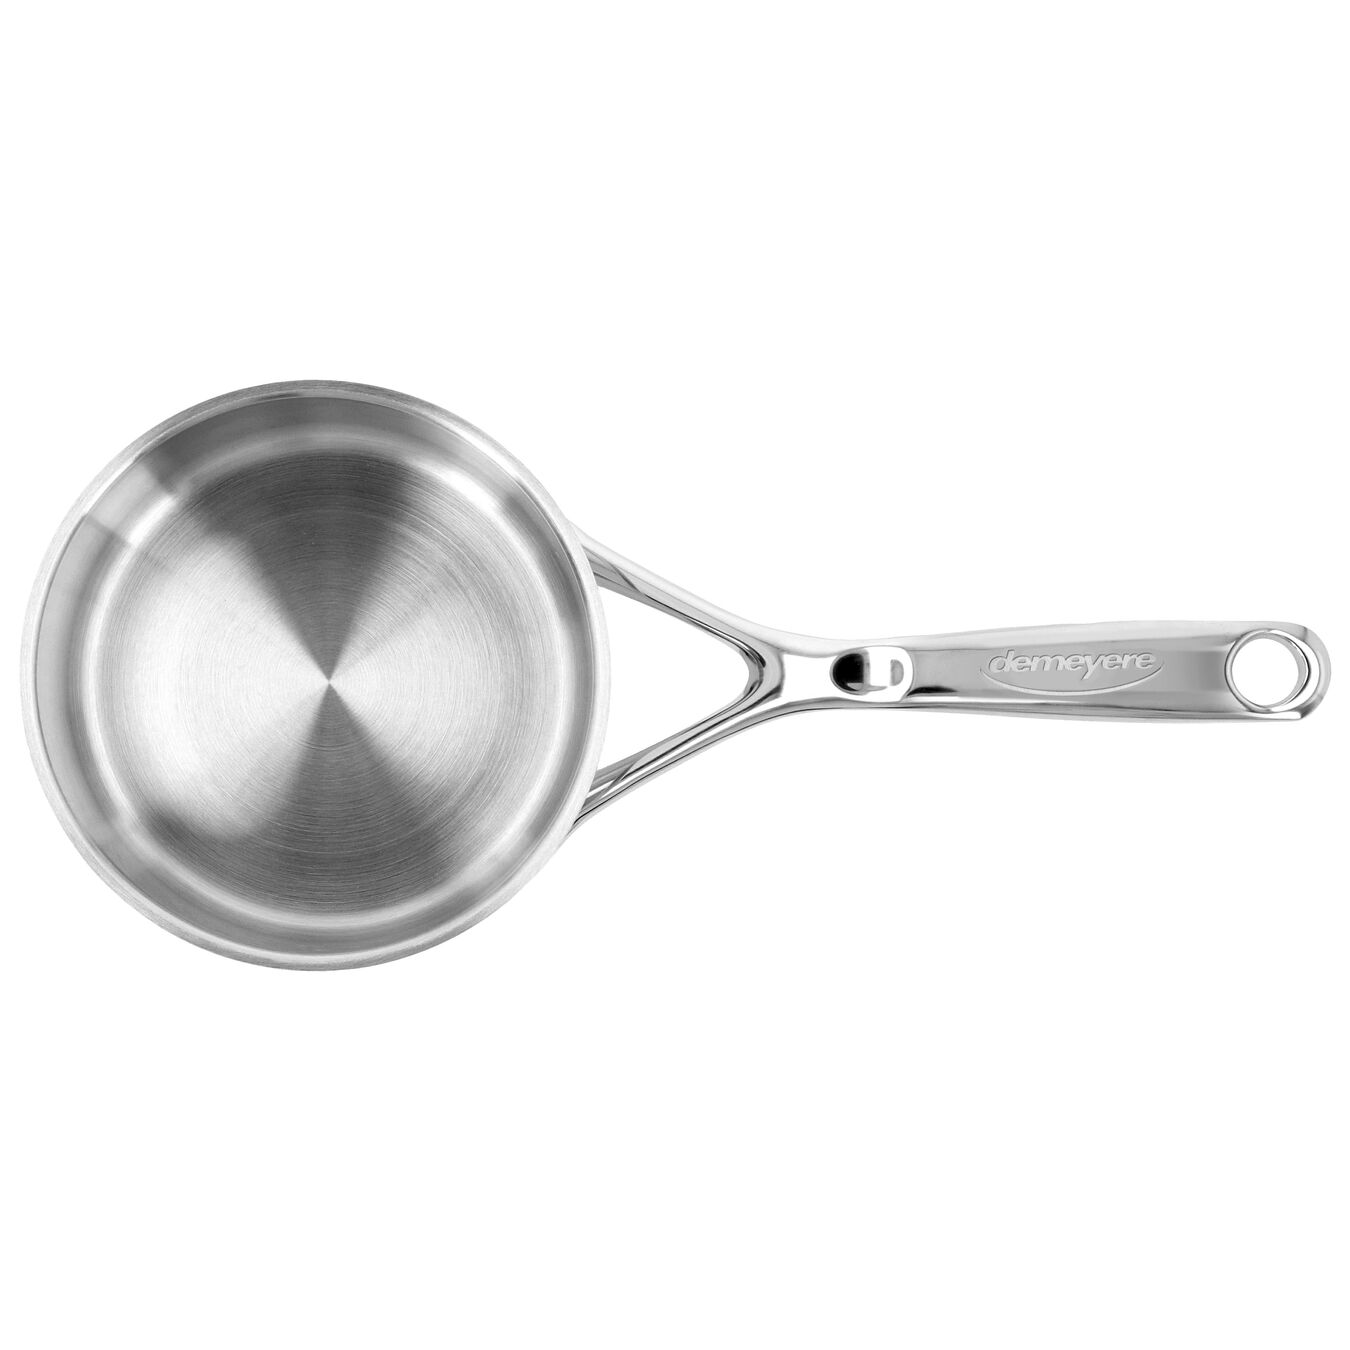 14 cm Stainless steel Saucepan with lid silver,,large 3